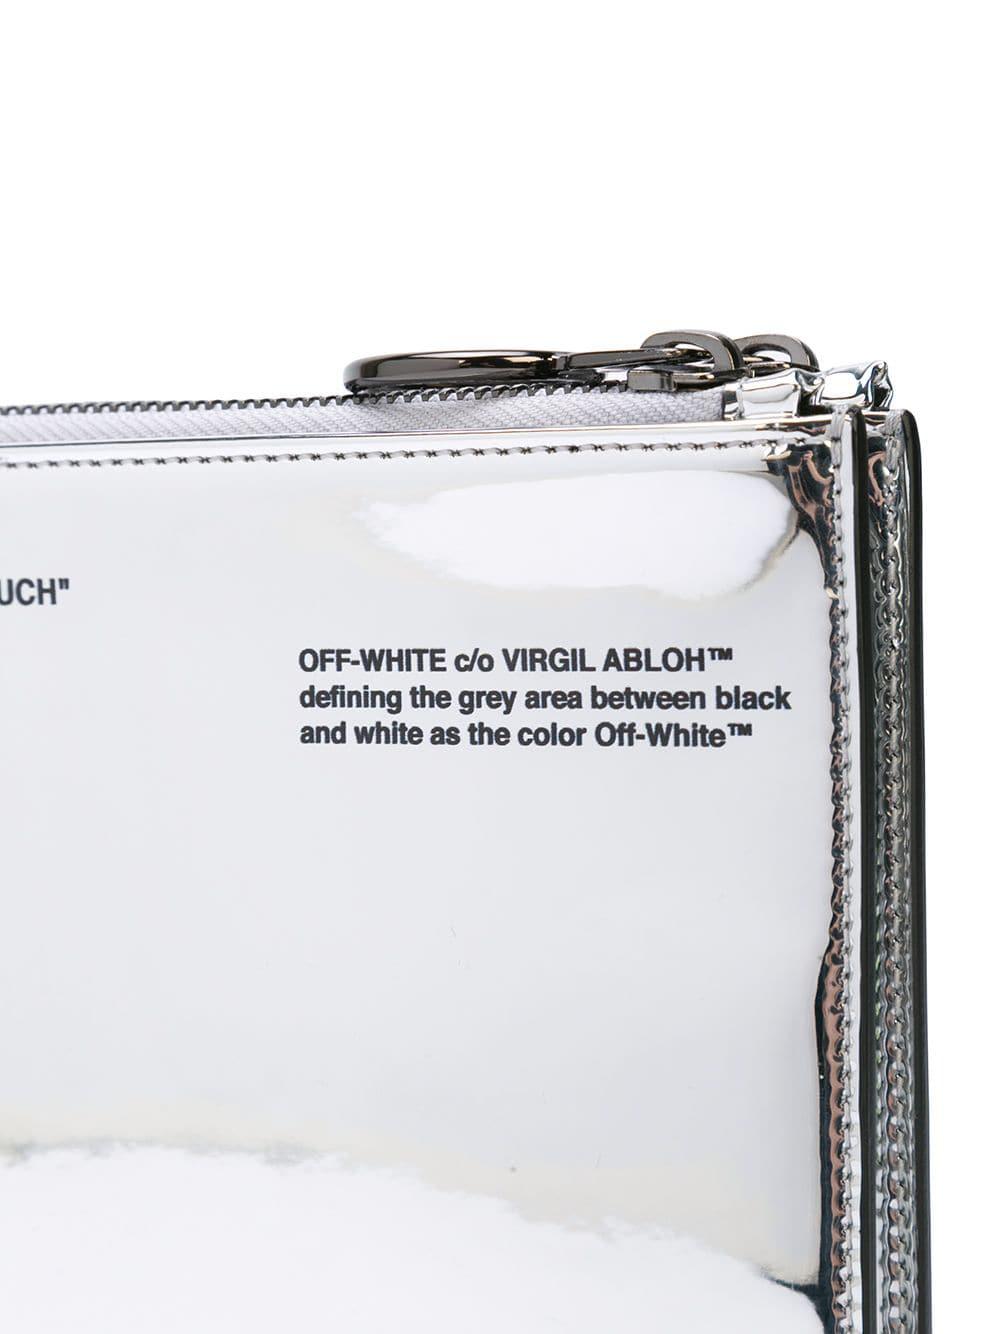 Off-White c/o Virgil Abloh Synthetic Mirror Clutch in Grey (Gray) - Lyst